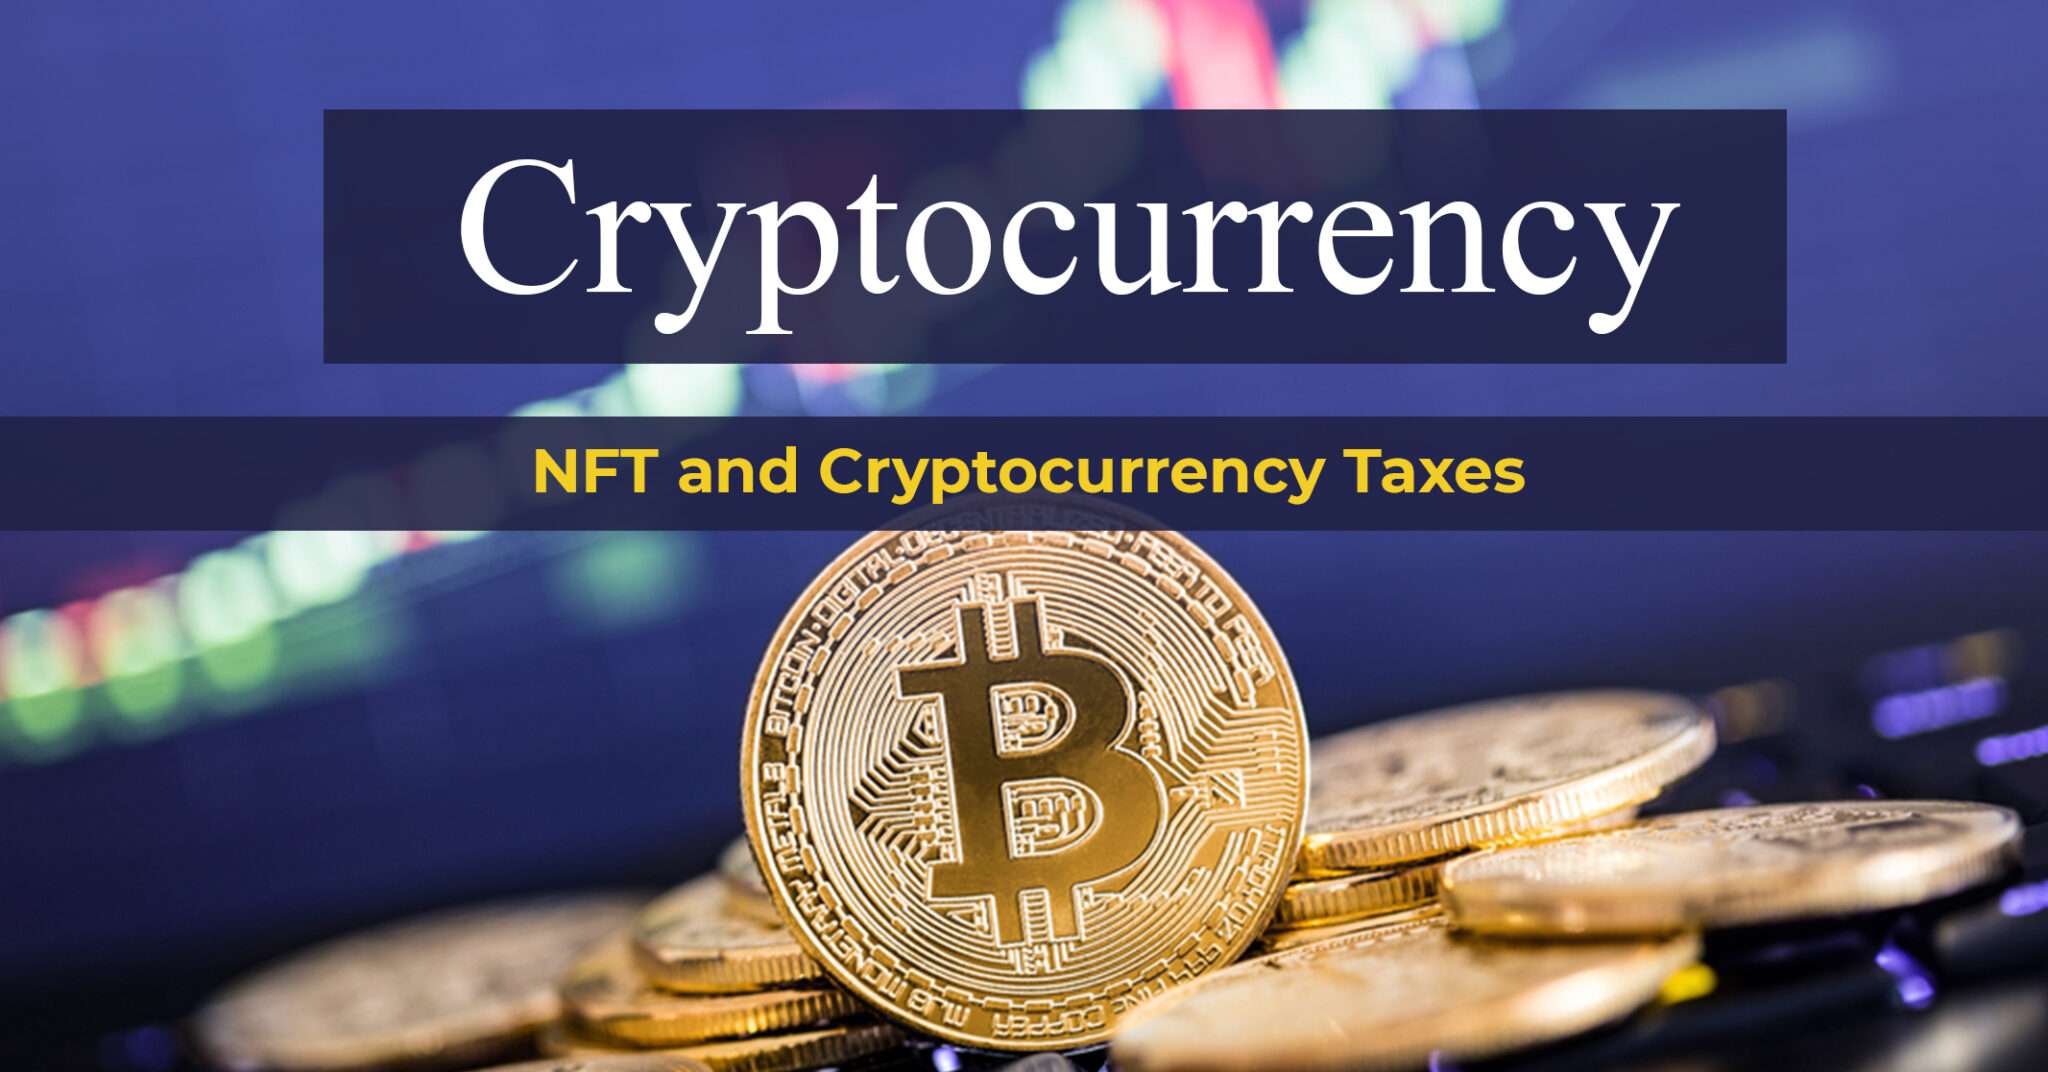 NFT and Cryptocurrency Image